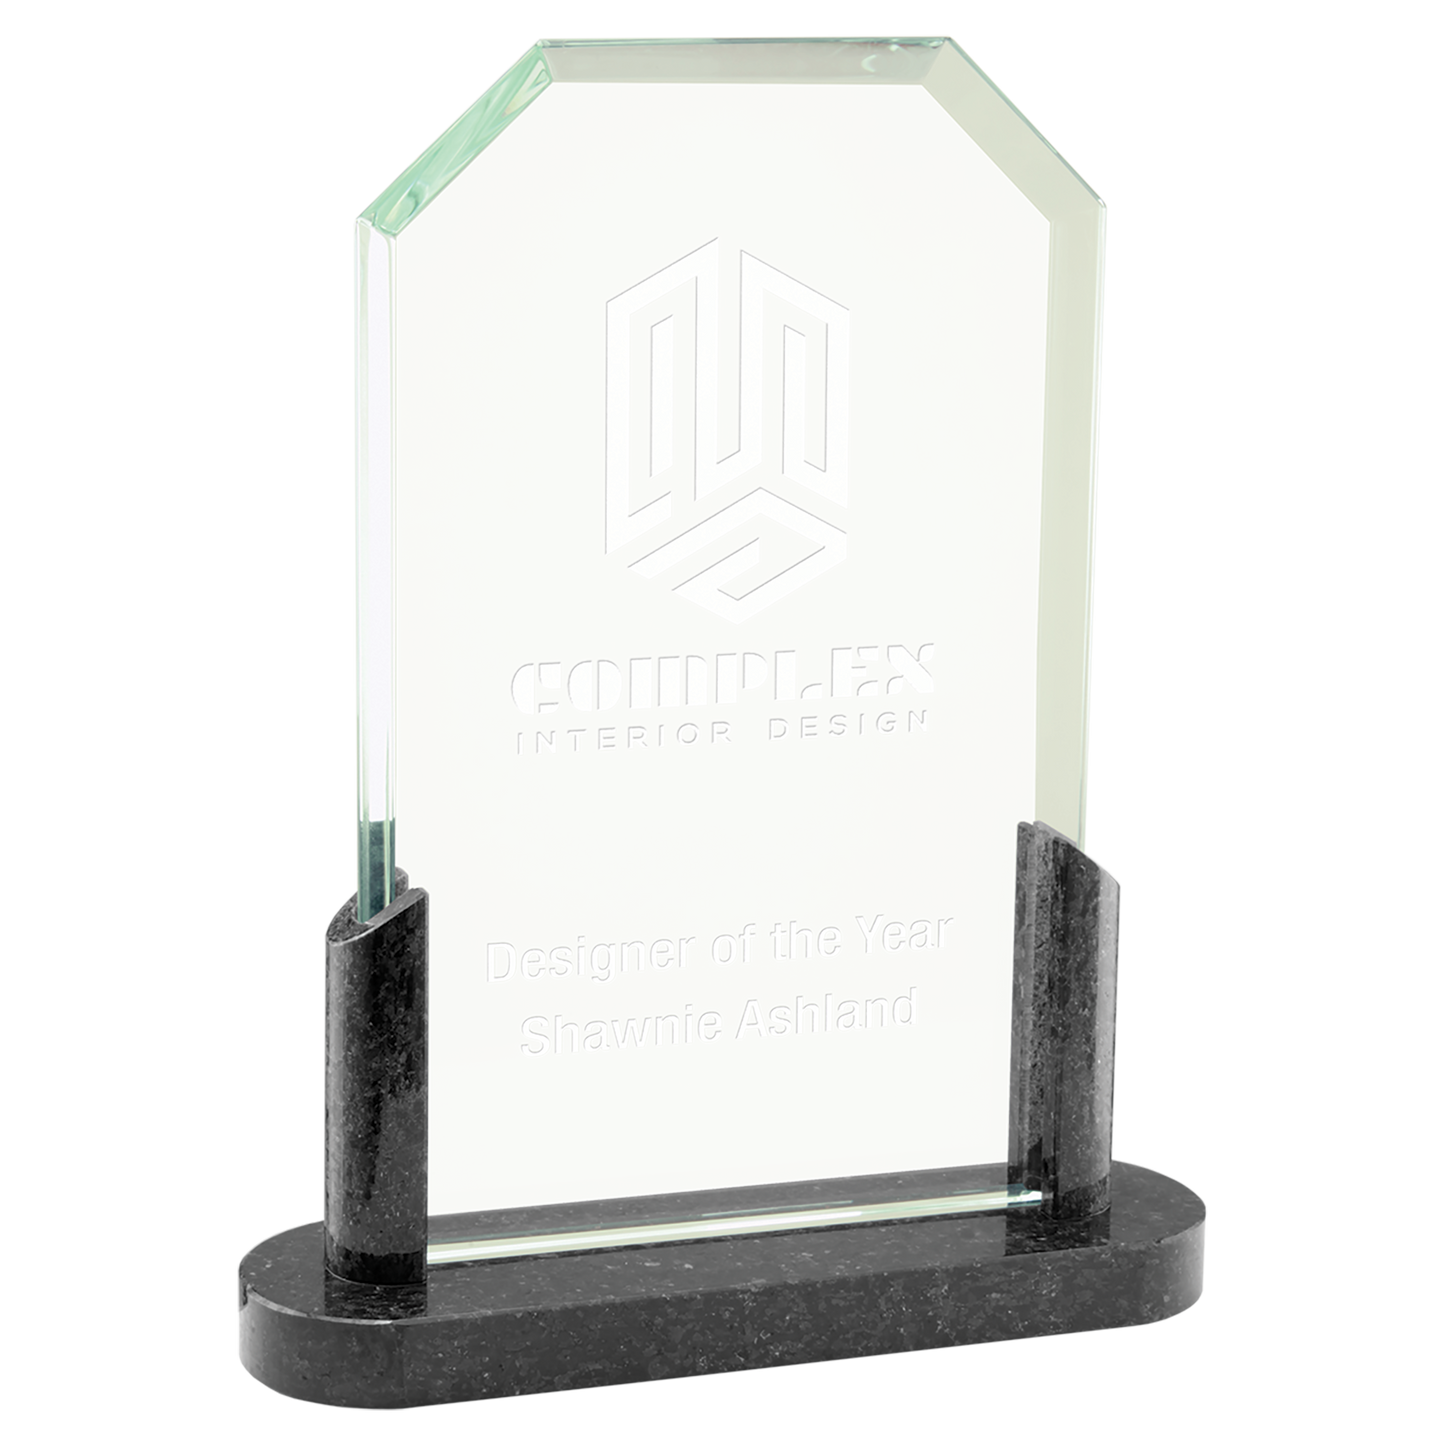 7 3/4" Clipped Corners Glass with Black Marble Base Corporate Awards - Glass Awards